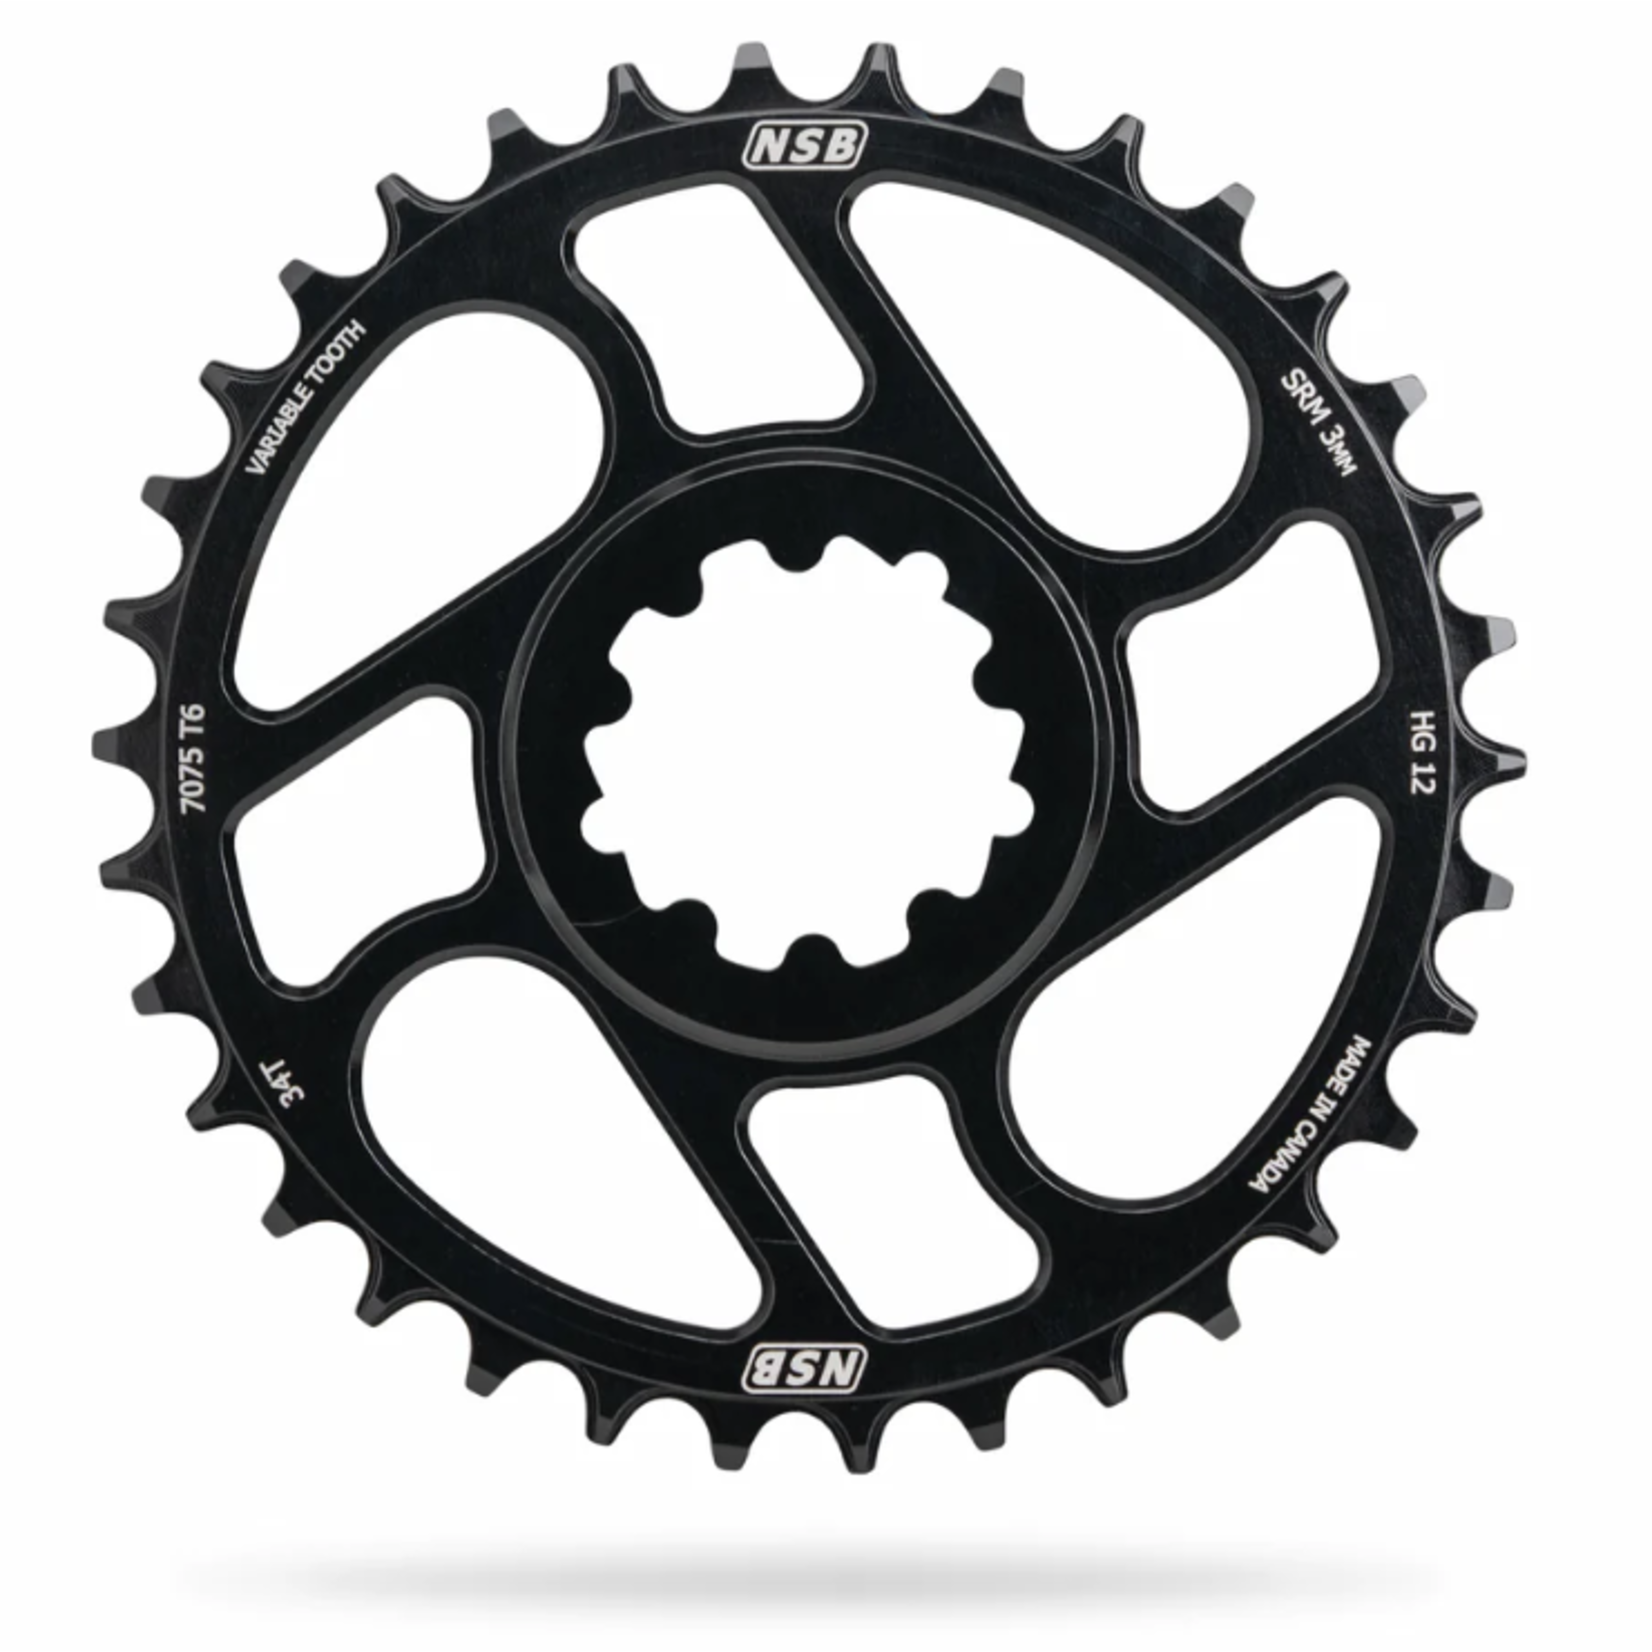 North Shore Billet NSB Variable Tooth Chainring, Direct Mount SRAM, Boost, 34T, for Shimano 12 speed drivetrain, Black